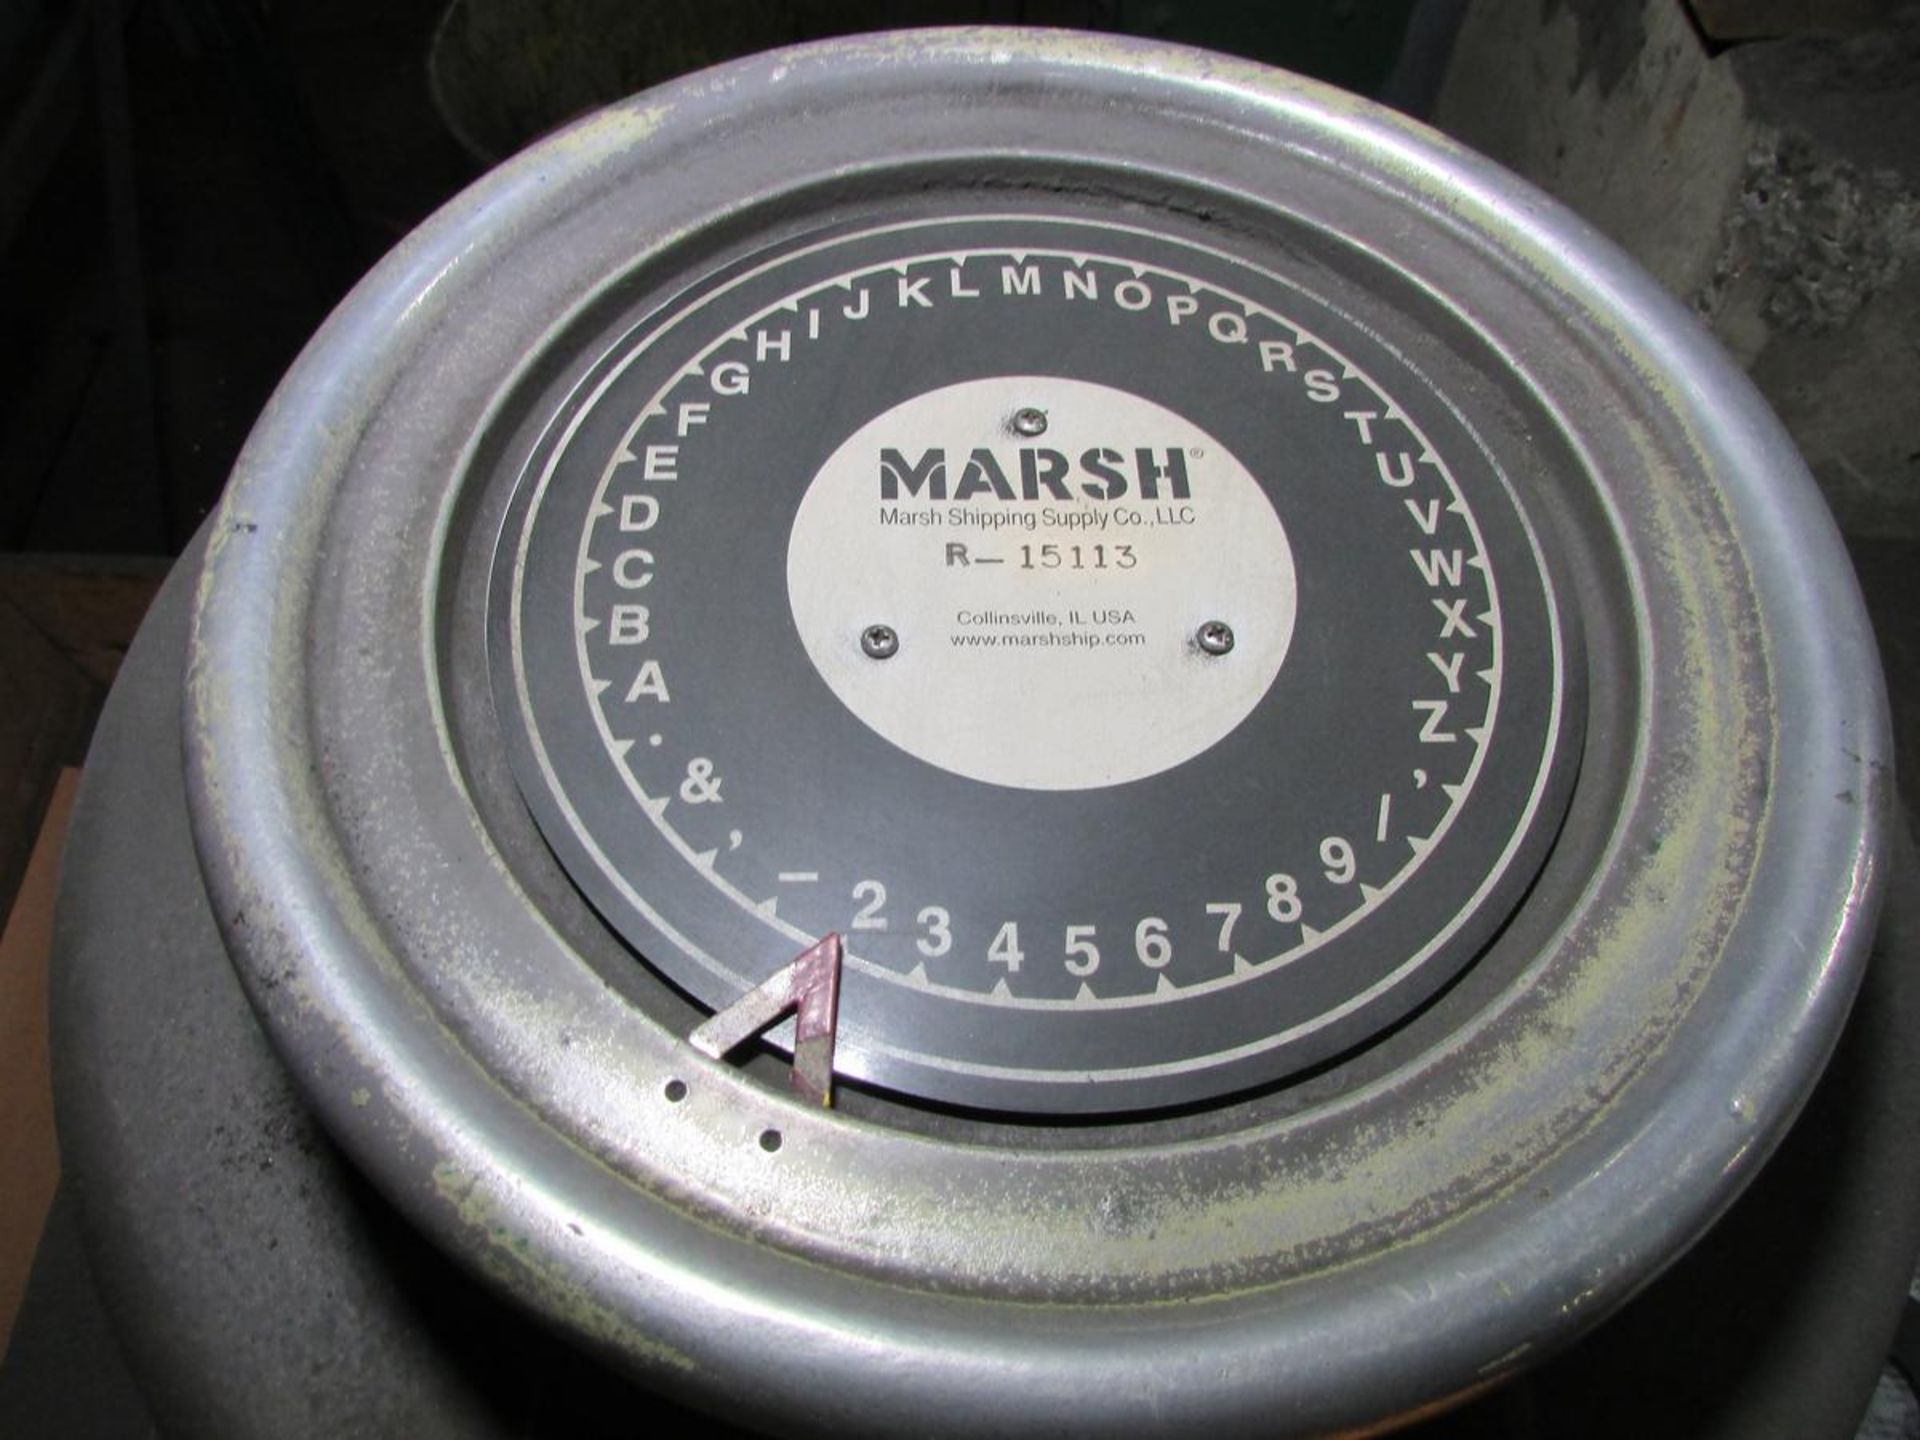 Marsh R-15113 Stencil Cutter - Image 3 of 4